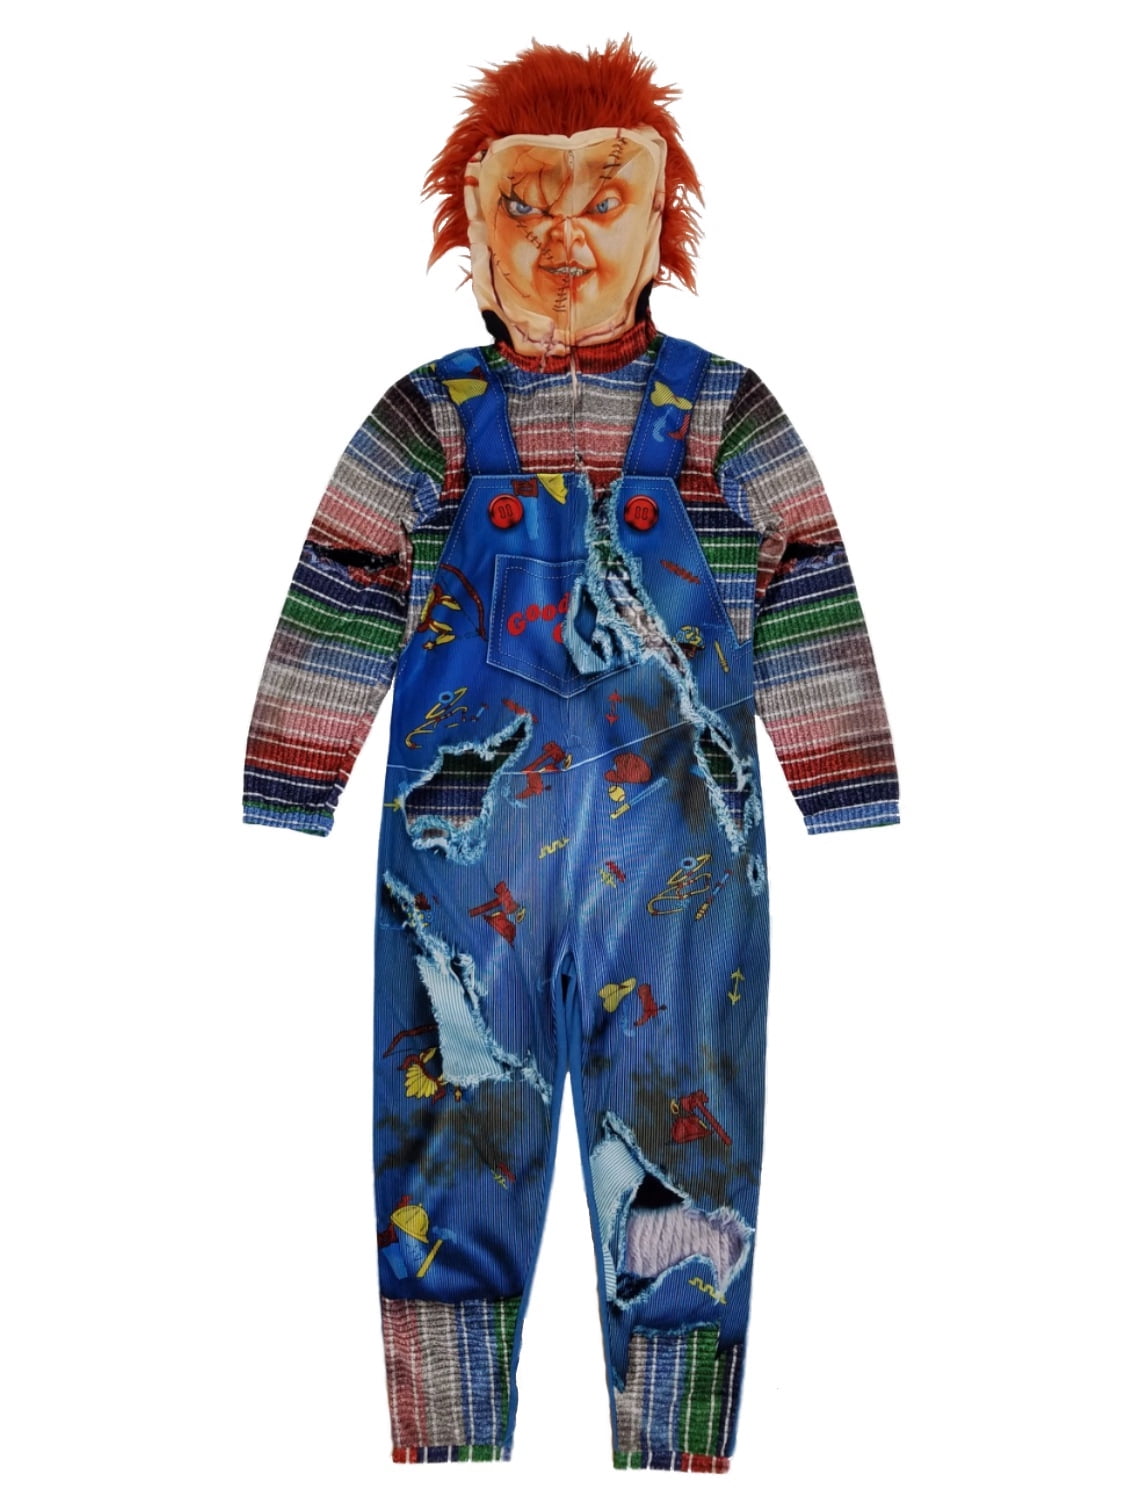 CHUCKY Child's Play Themed ~ Union Suit One Piece Men's Pajamas ~ L Large ~ NEW 